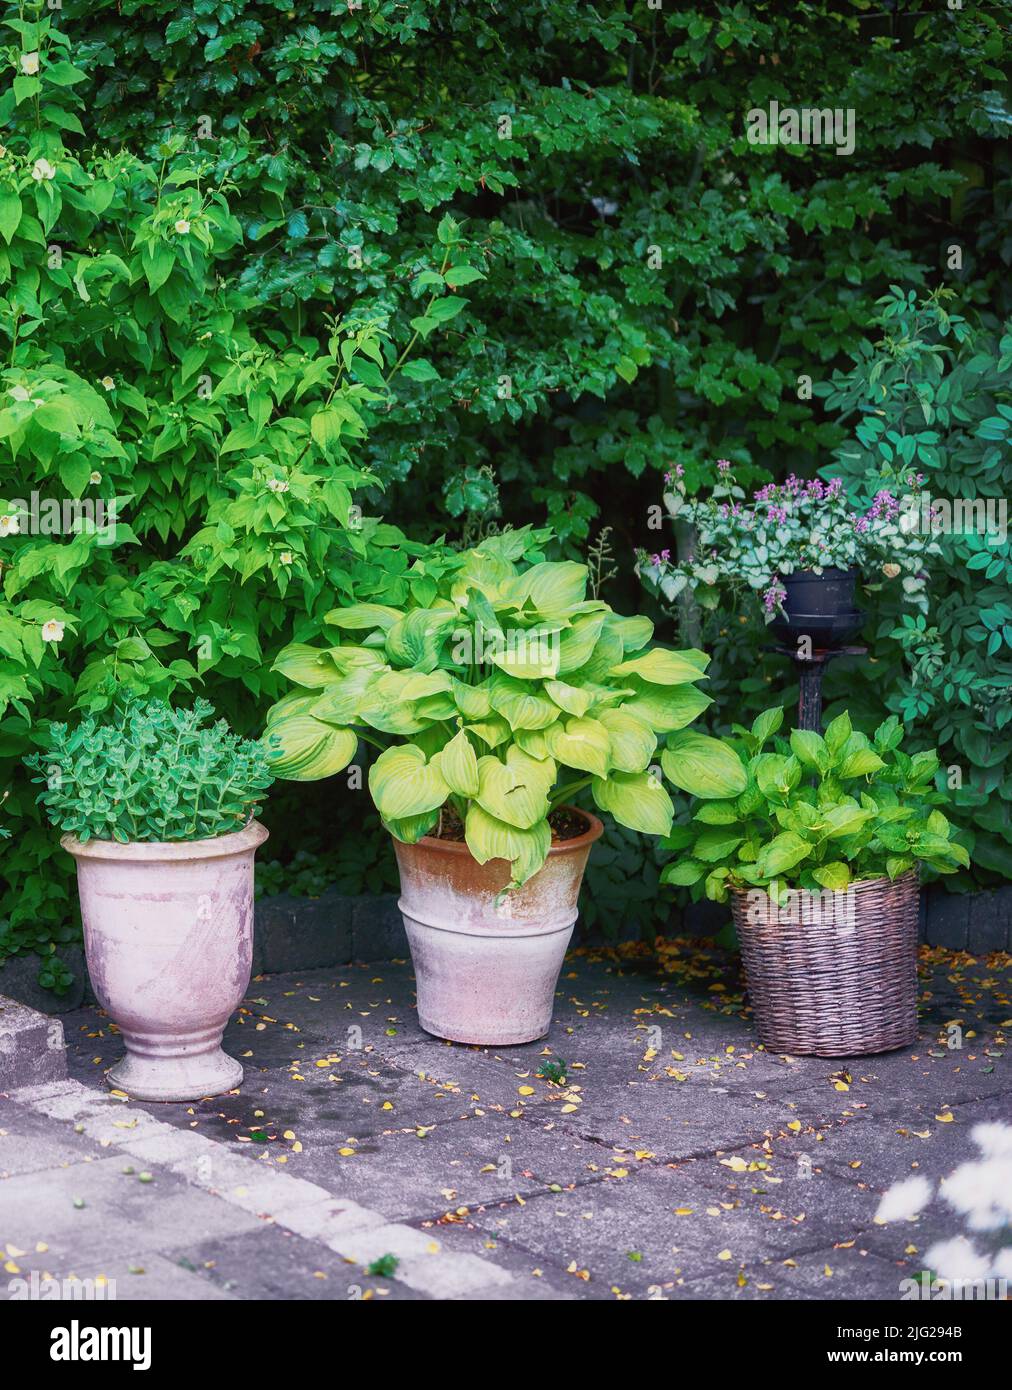 Clay and wicker pots with healthy green plants growing in a garden. A calm and quiet botanical garden filled with lush organic flowers blooms in a Stock Photo